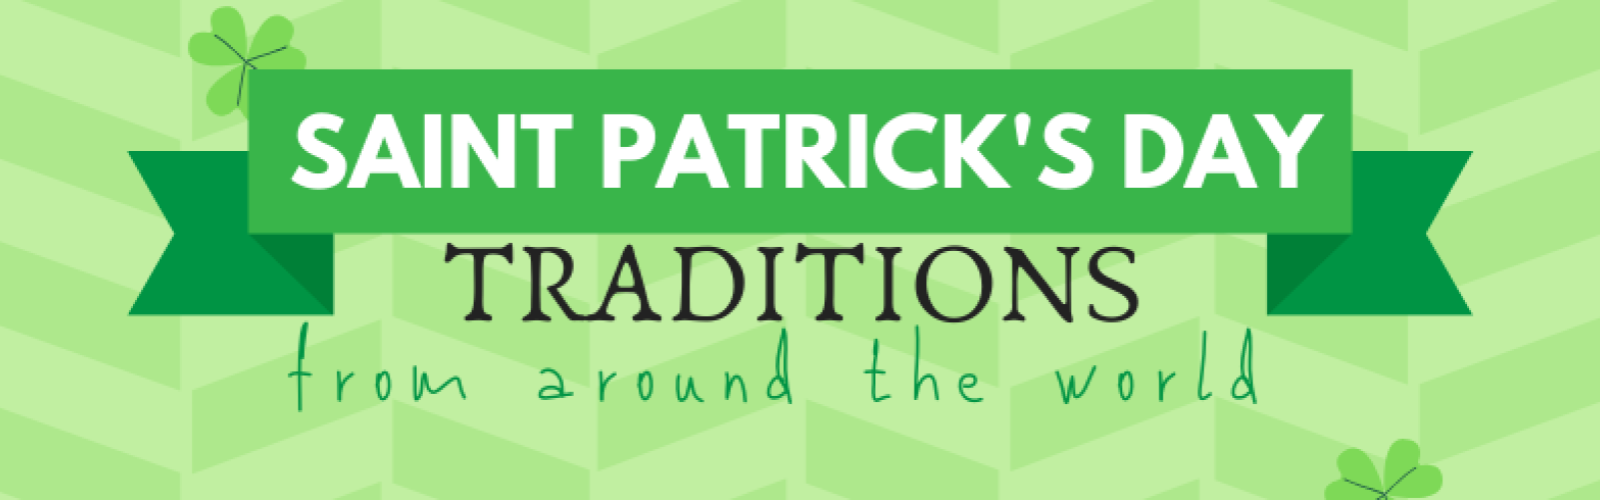 St Patrick's Day Traditions Infographic-Banner